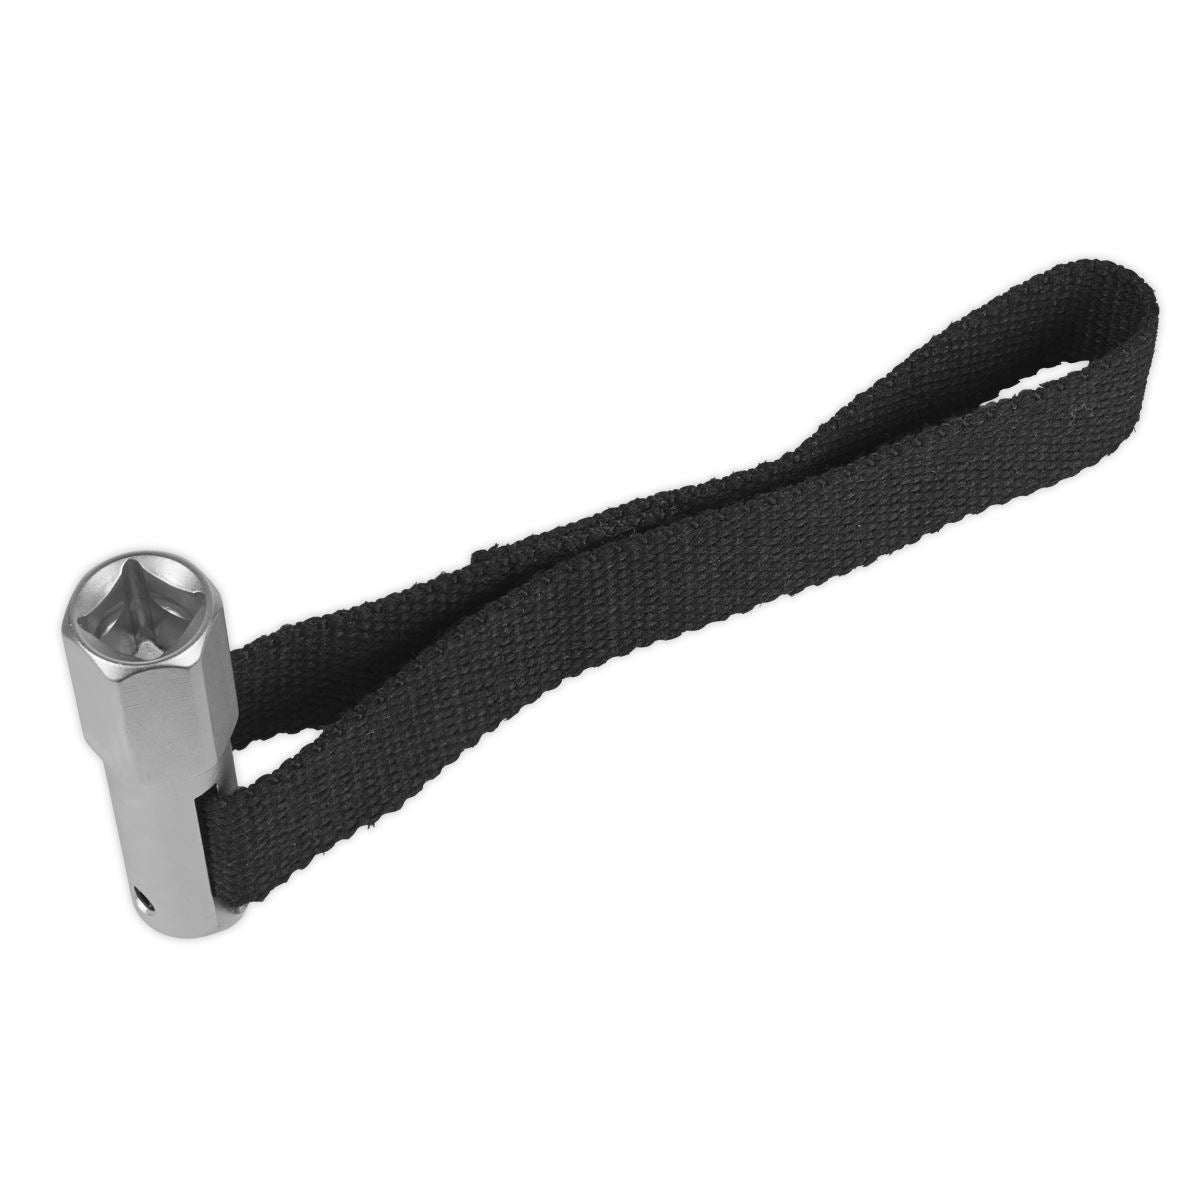 Sealey Oil Filter Strap Wrench 120mm Capacity 1/2"Sq Drive